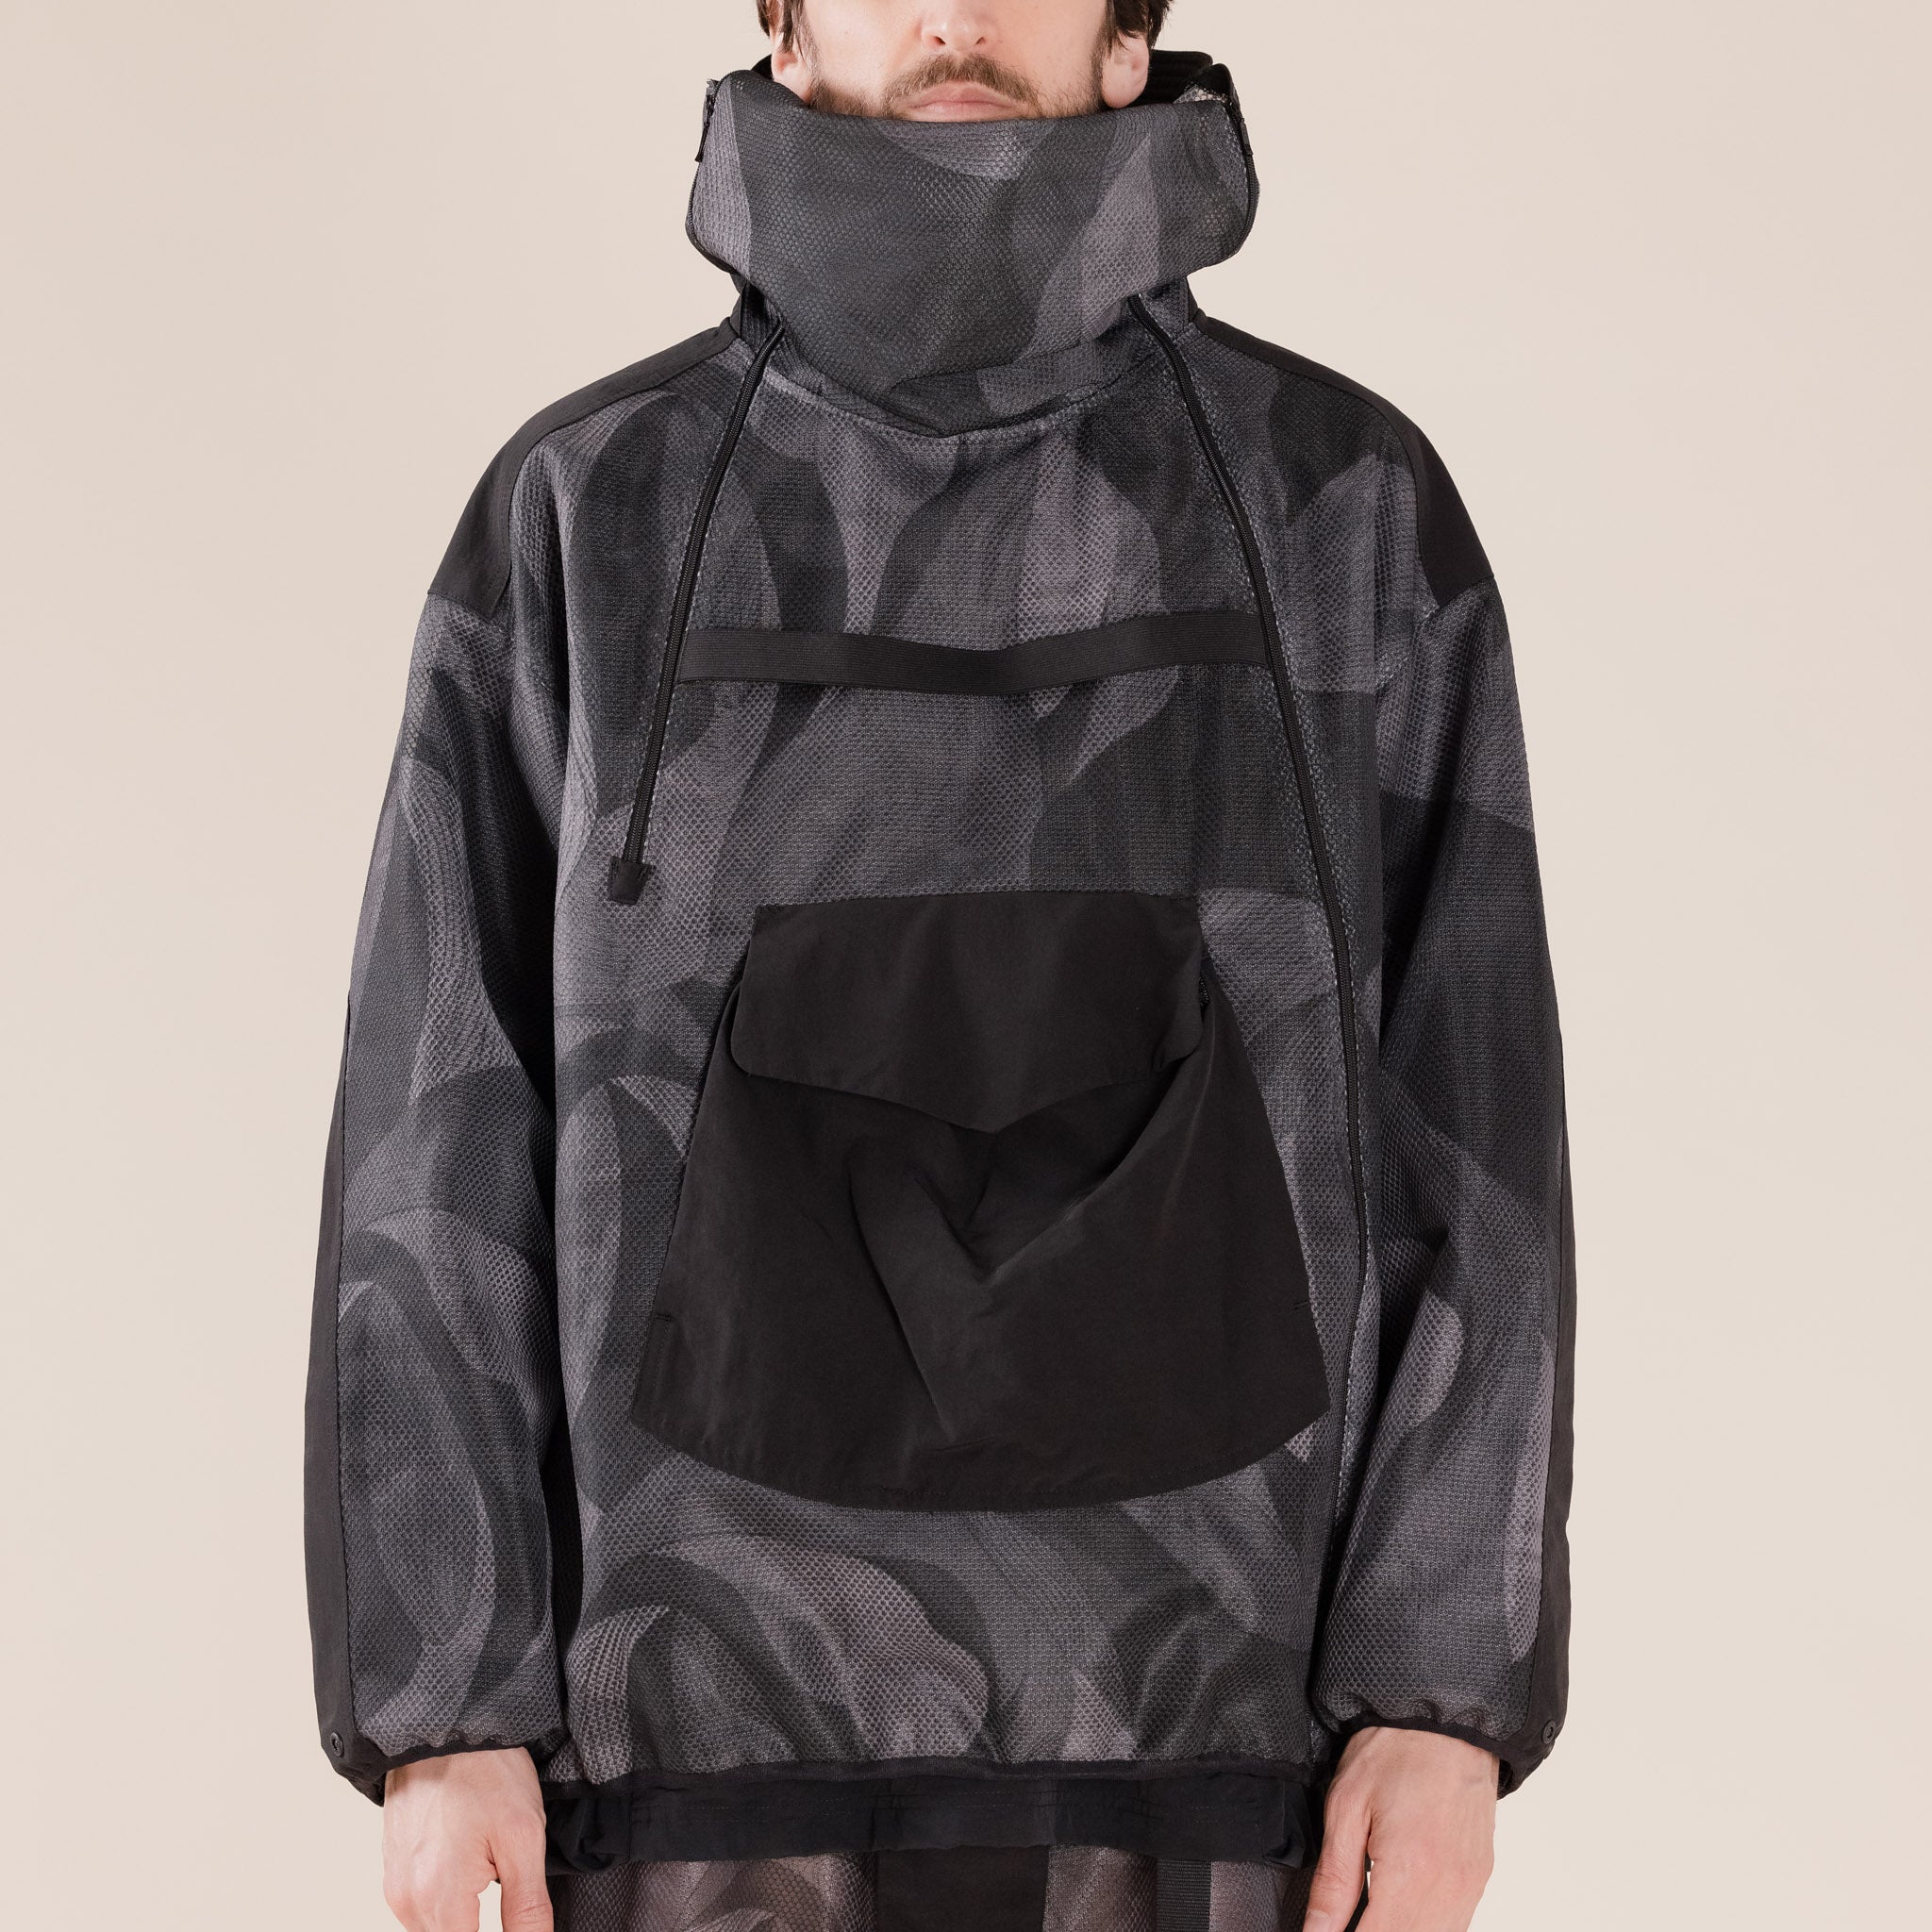 This Thing Of Ours x Norbit by Hiroshi Nozawa - Insect Shield Jacket - A/C Black Grey Exclusive Collaboration